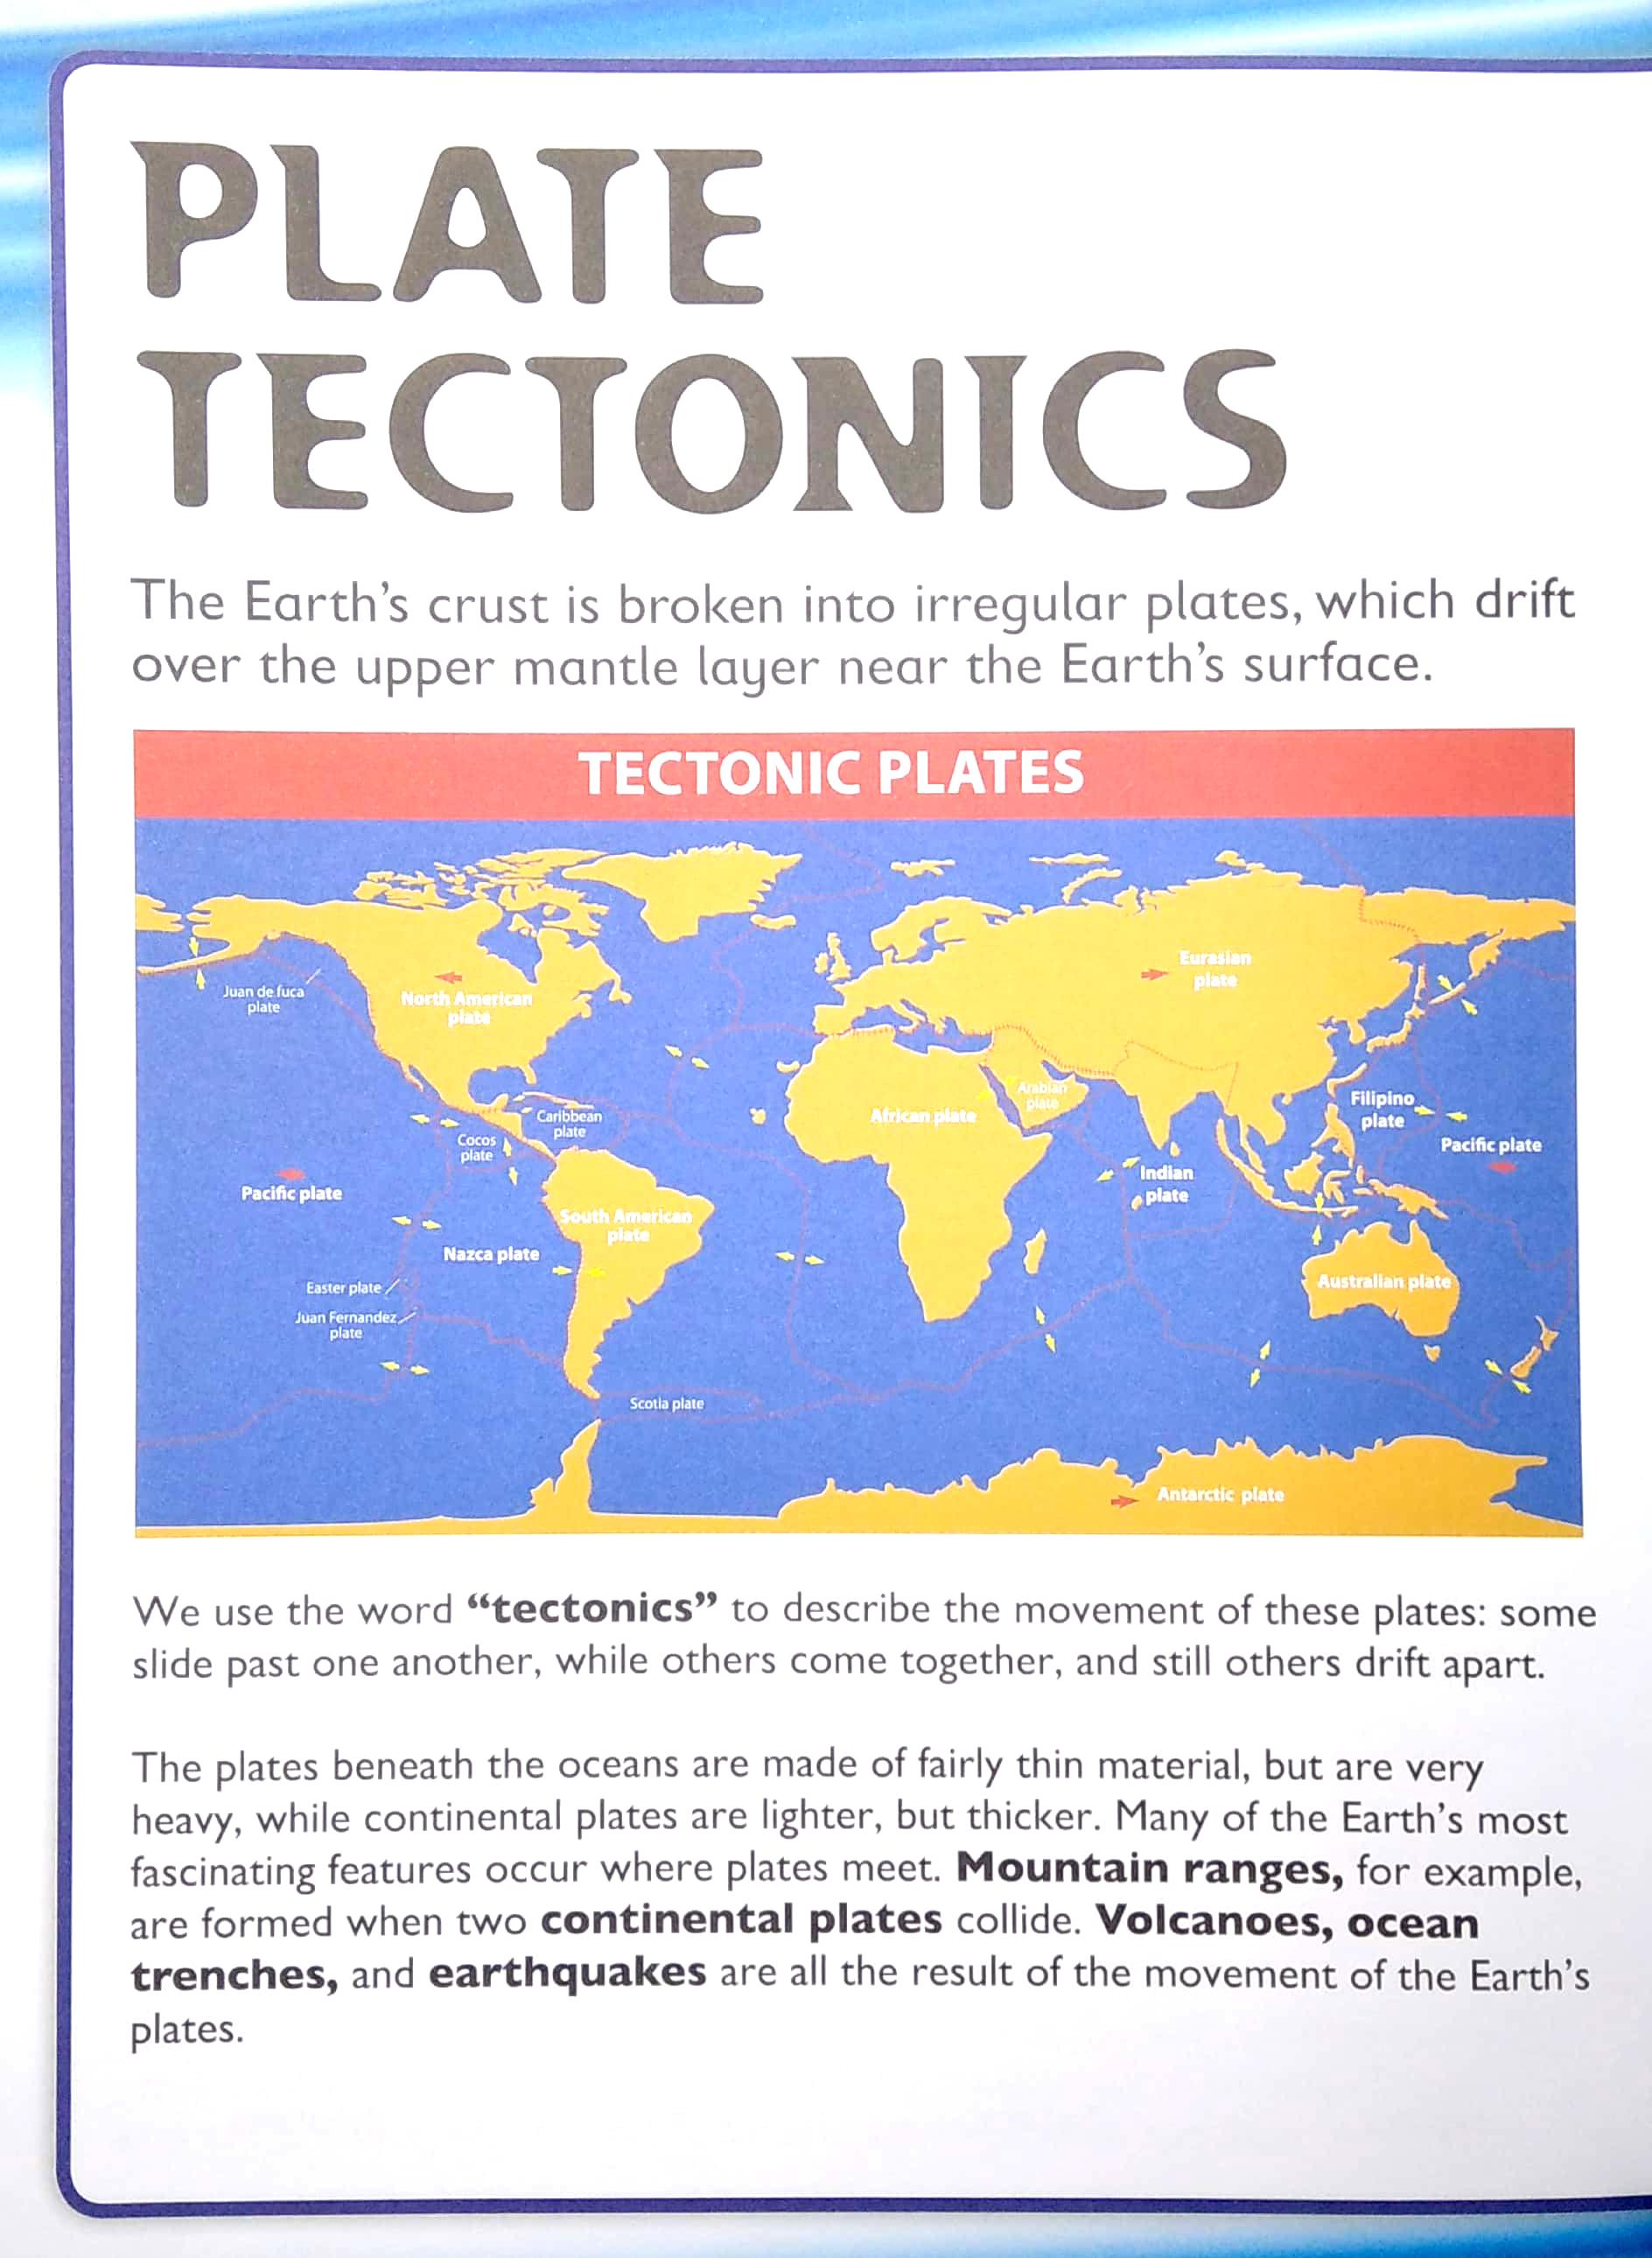 Wonders Of Learning - Sticker Book - Discover The Earth